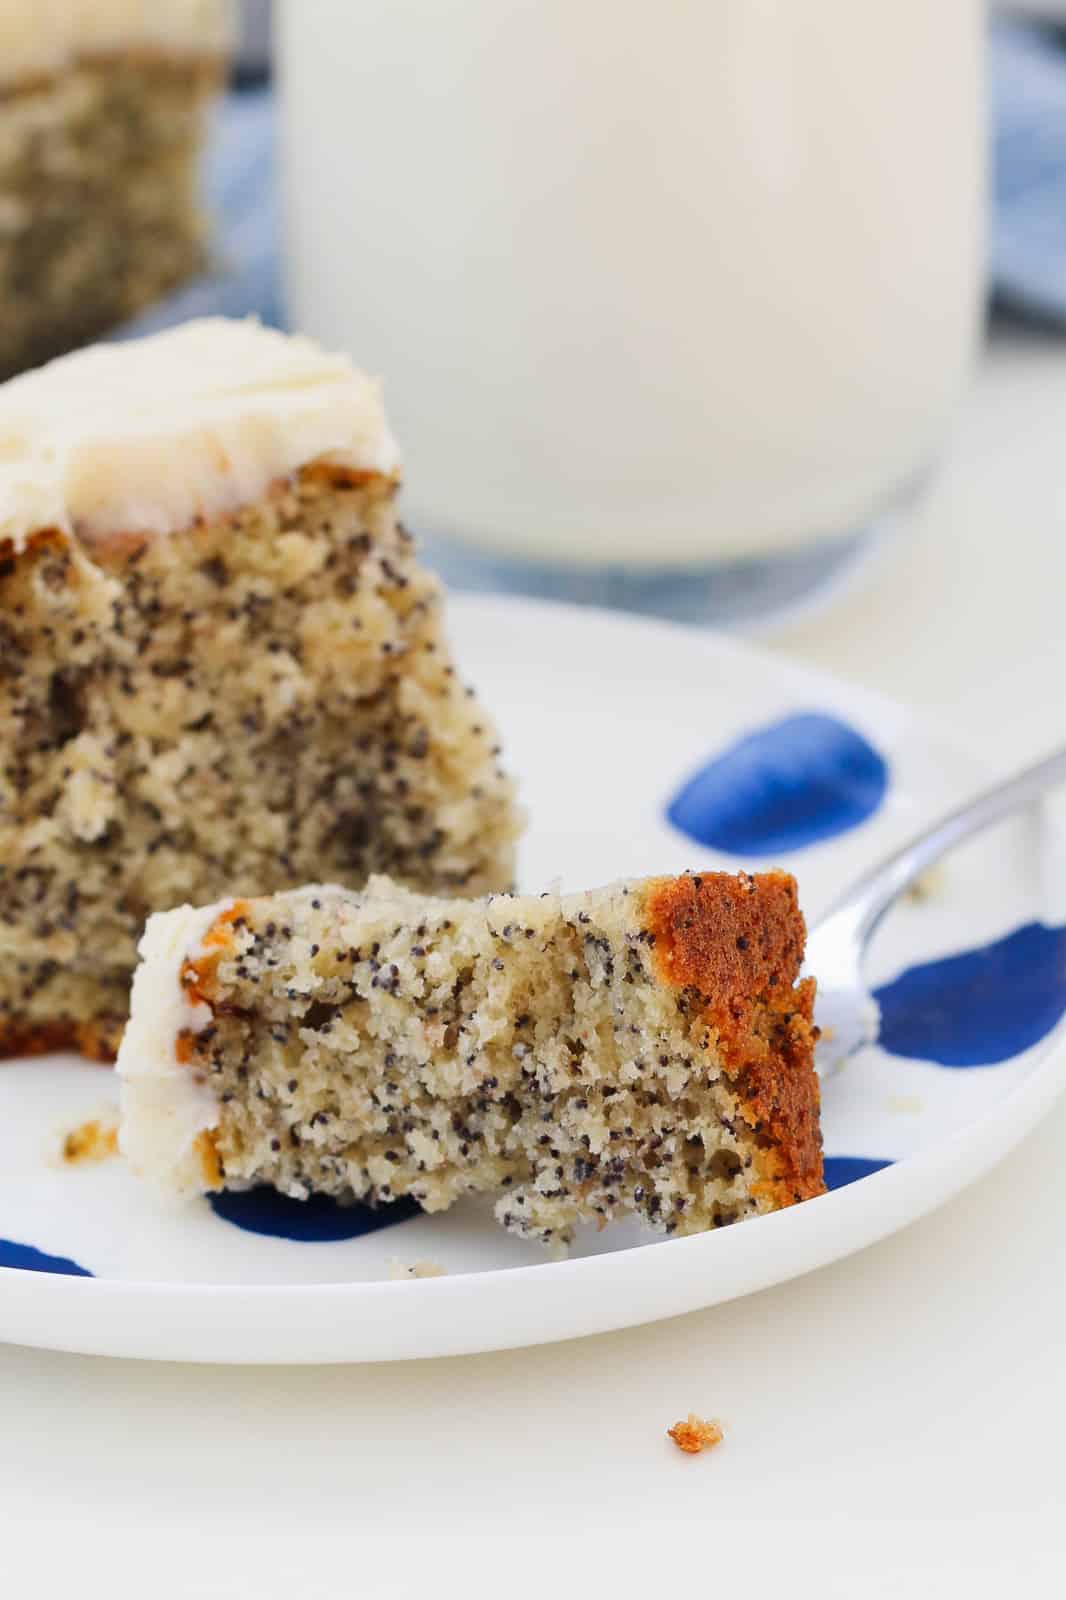 A split piece of frosted poppy seed cake on a white & blue plate, with a glass of milk and more cake on a blue and white towel in the background.